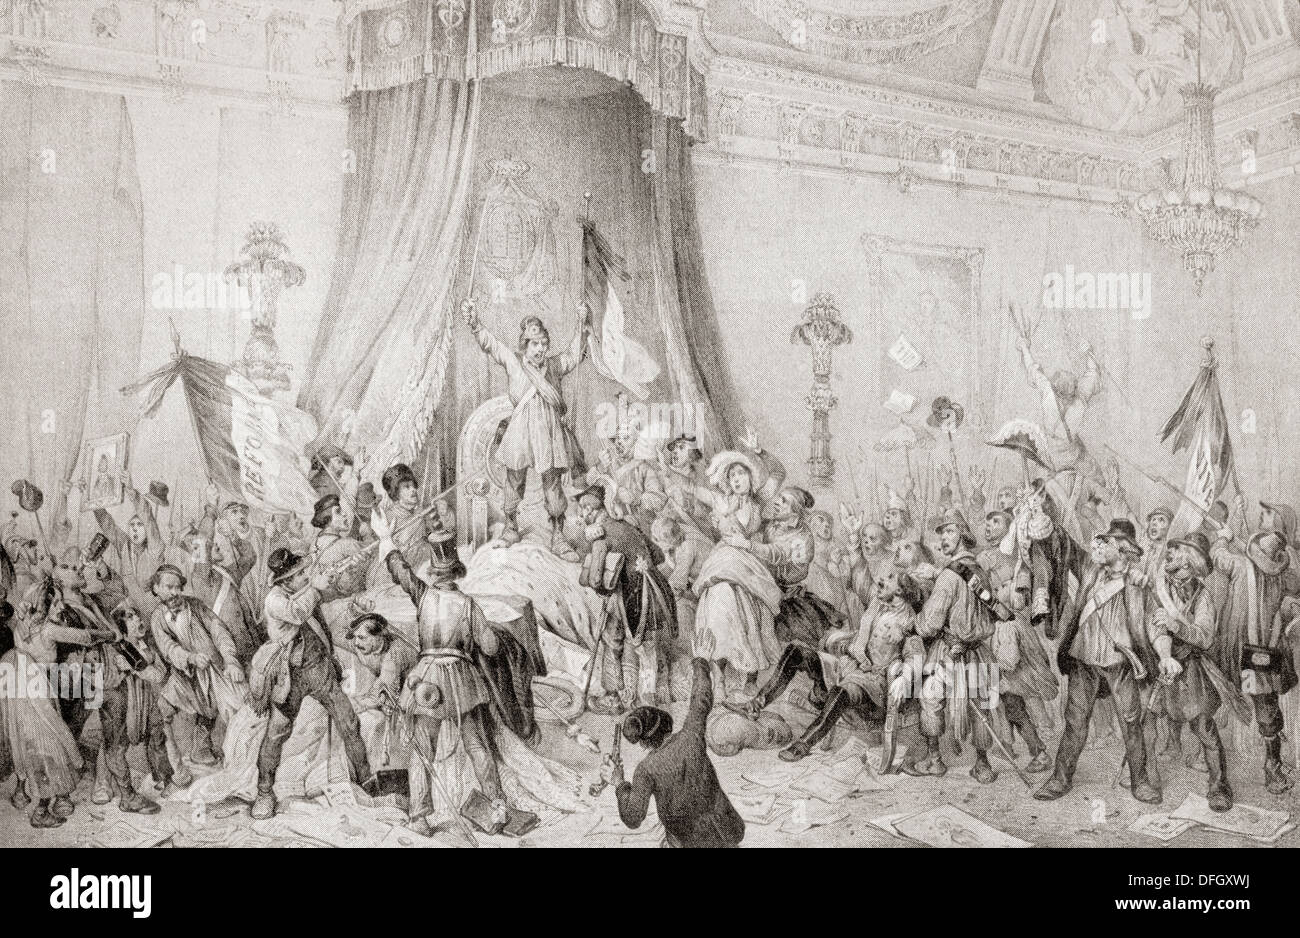 The Paris Revolution of 1848, the mob in the throne room of the Tuileries. Stock Photo